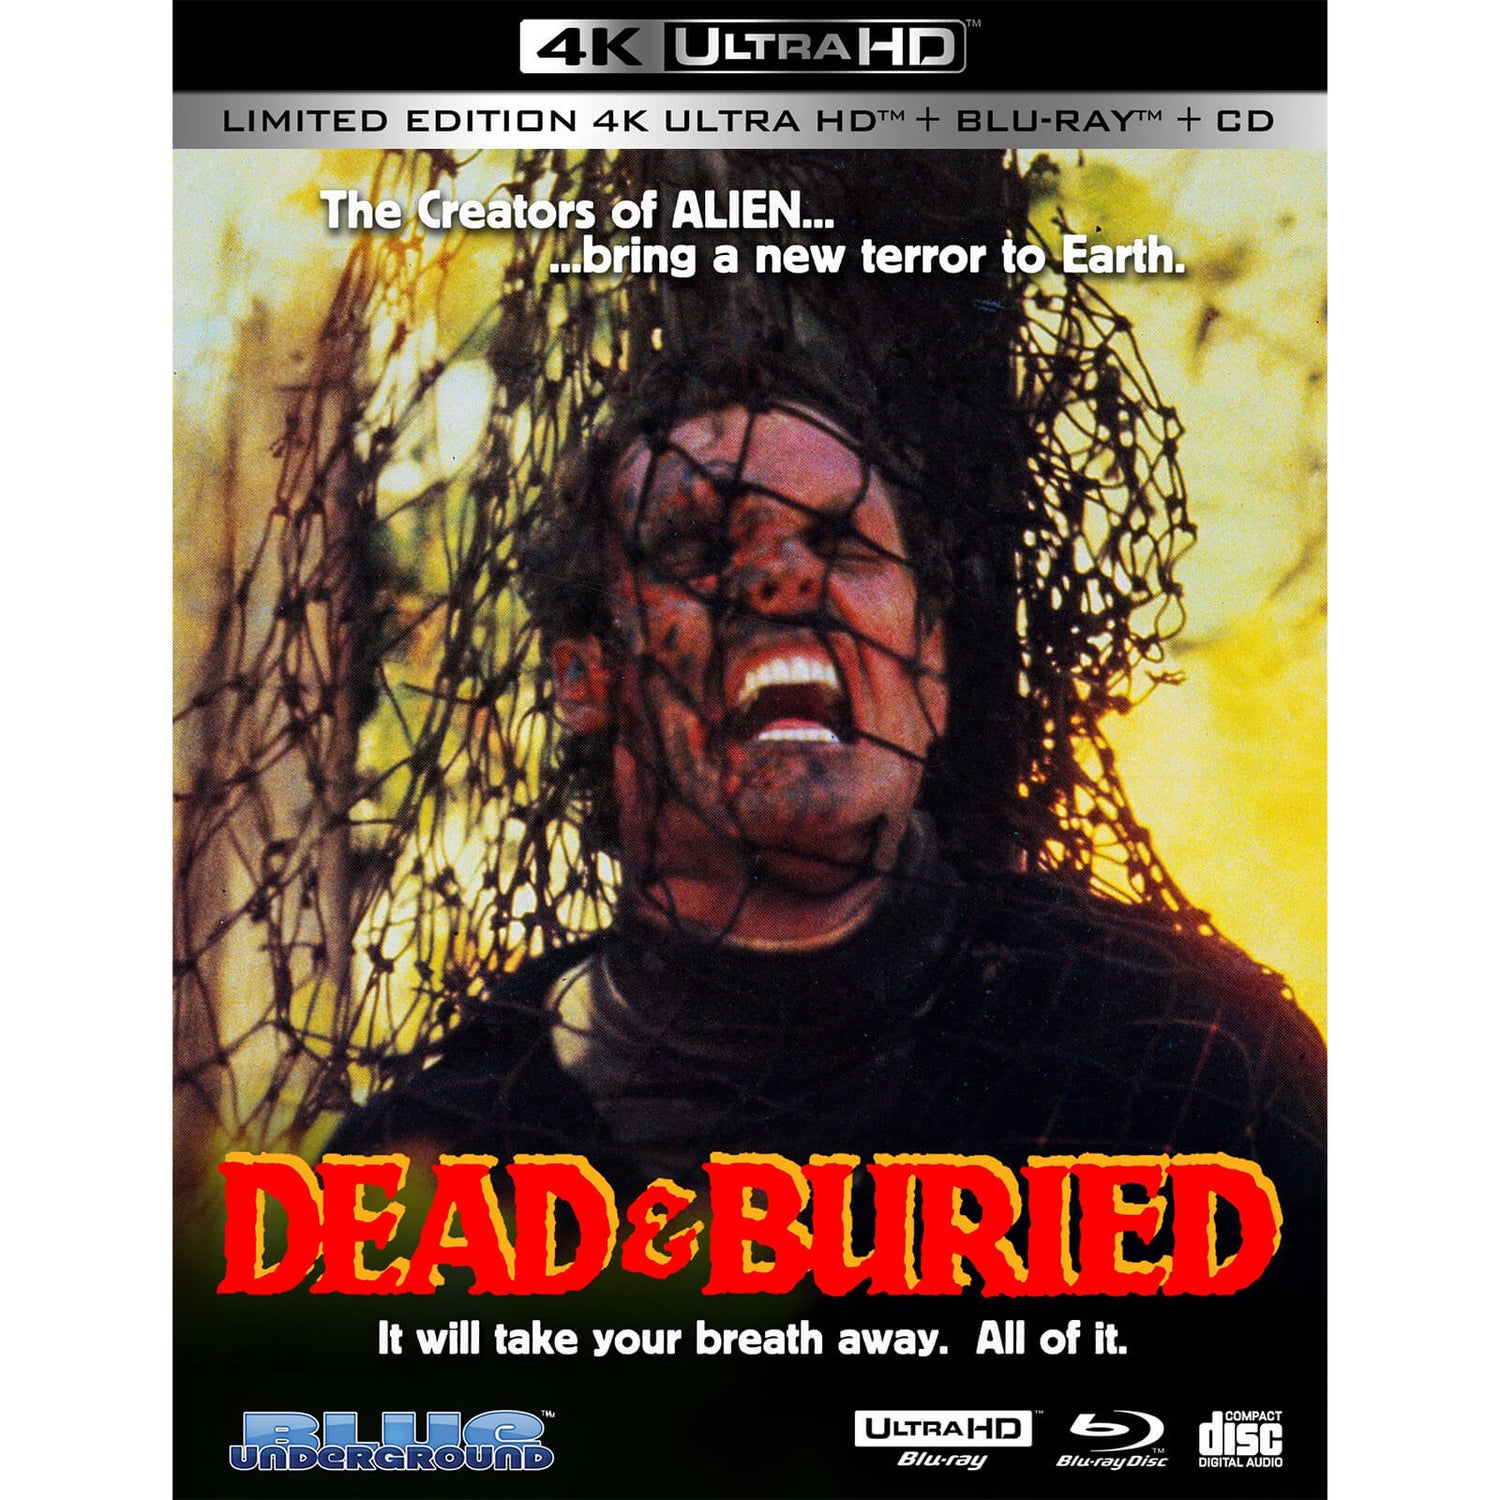 Dead & Buried - Limited Edition 4K UHD (Cover B) (Includes Blu-ray and CD)